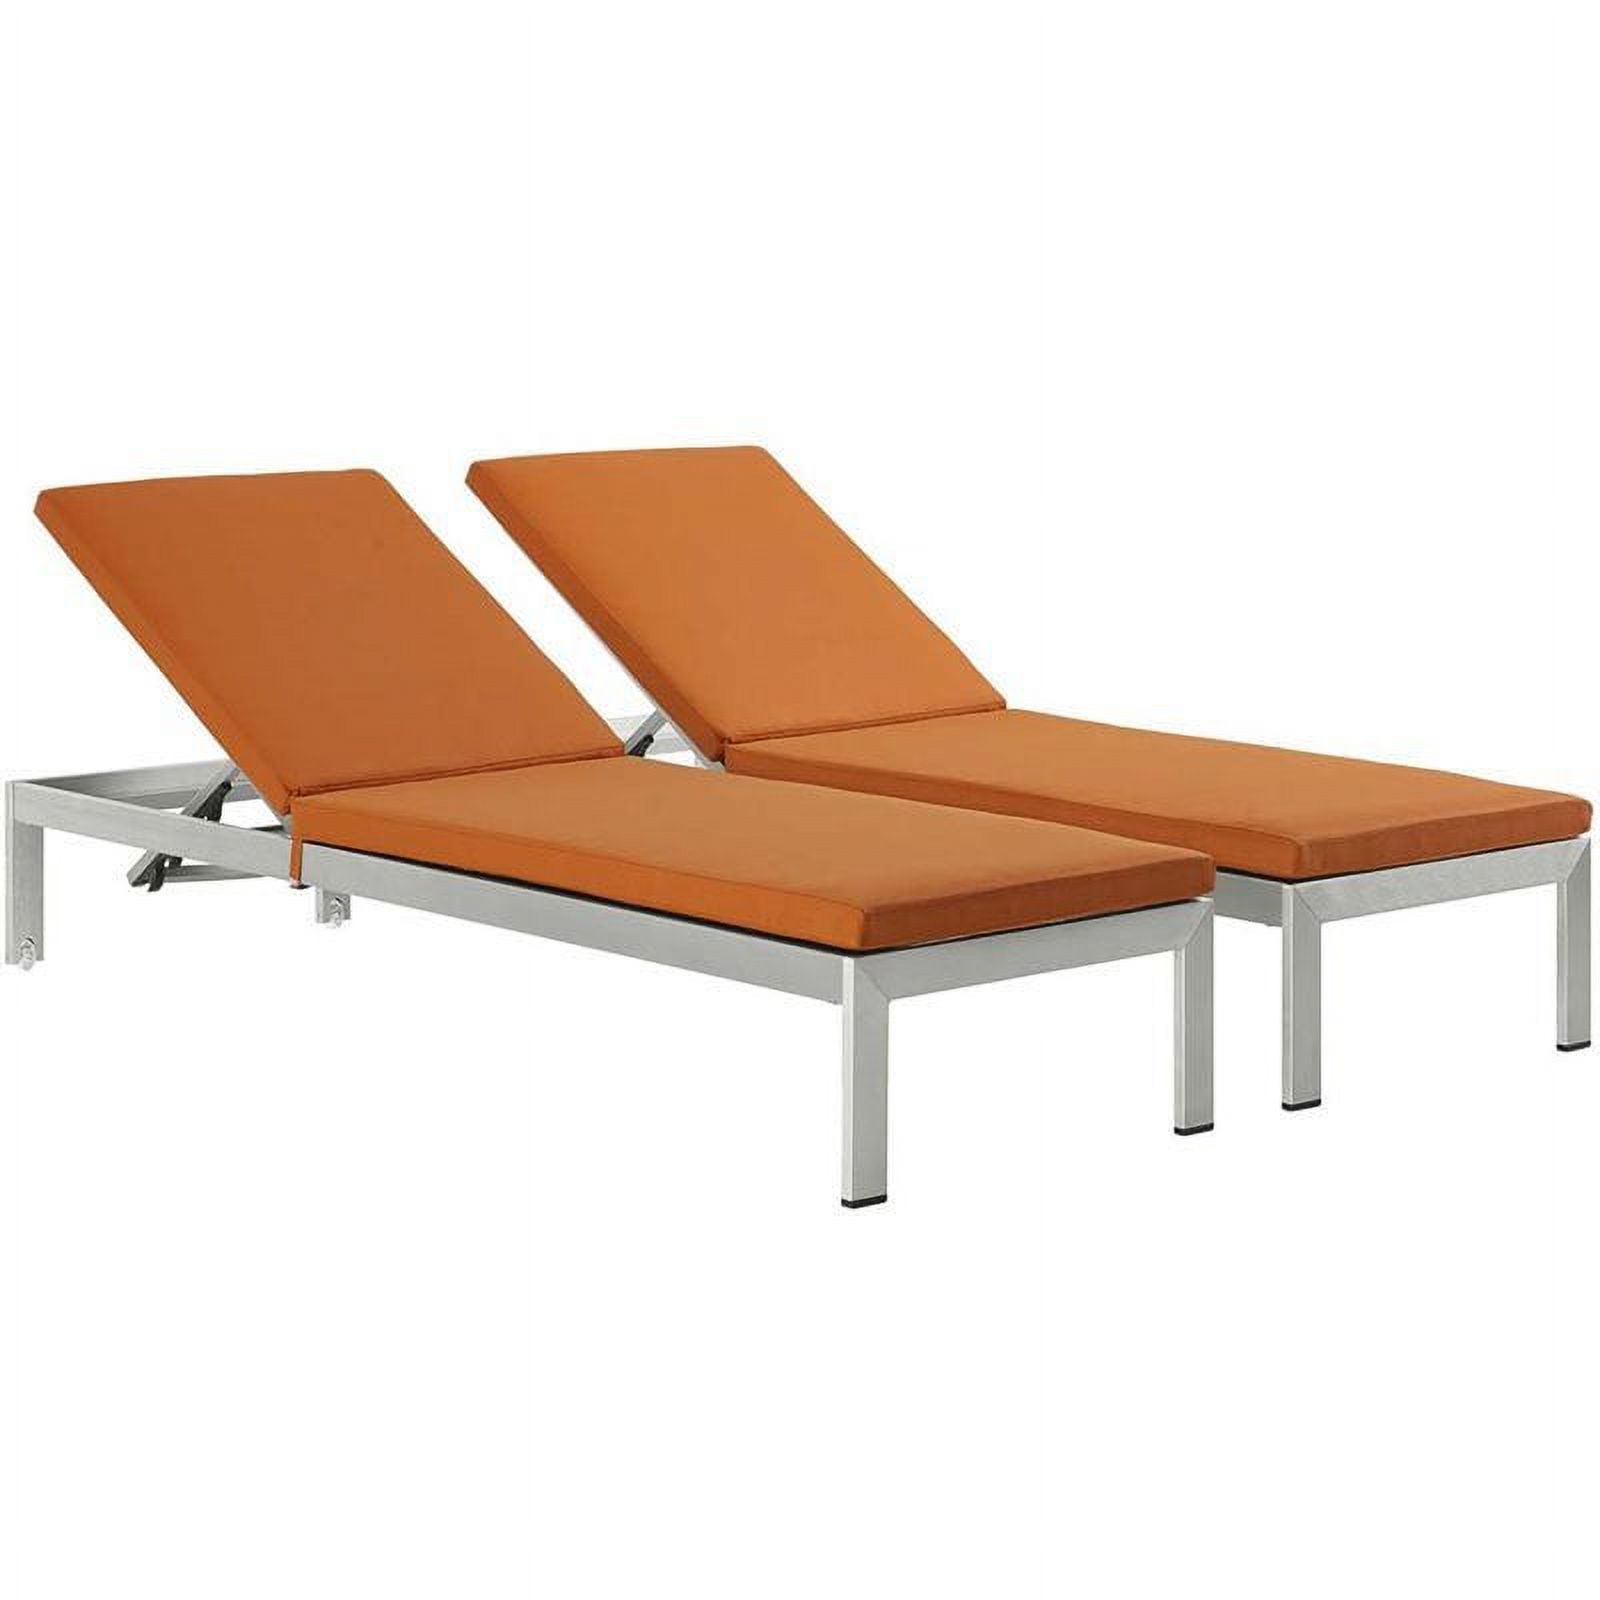 Pemberly Row Modern Fabric Patio Chaise Lounge in Orange (Set of 2) - image 1 of 6